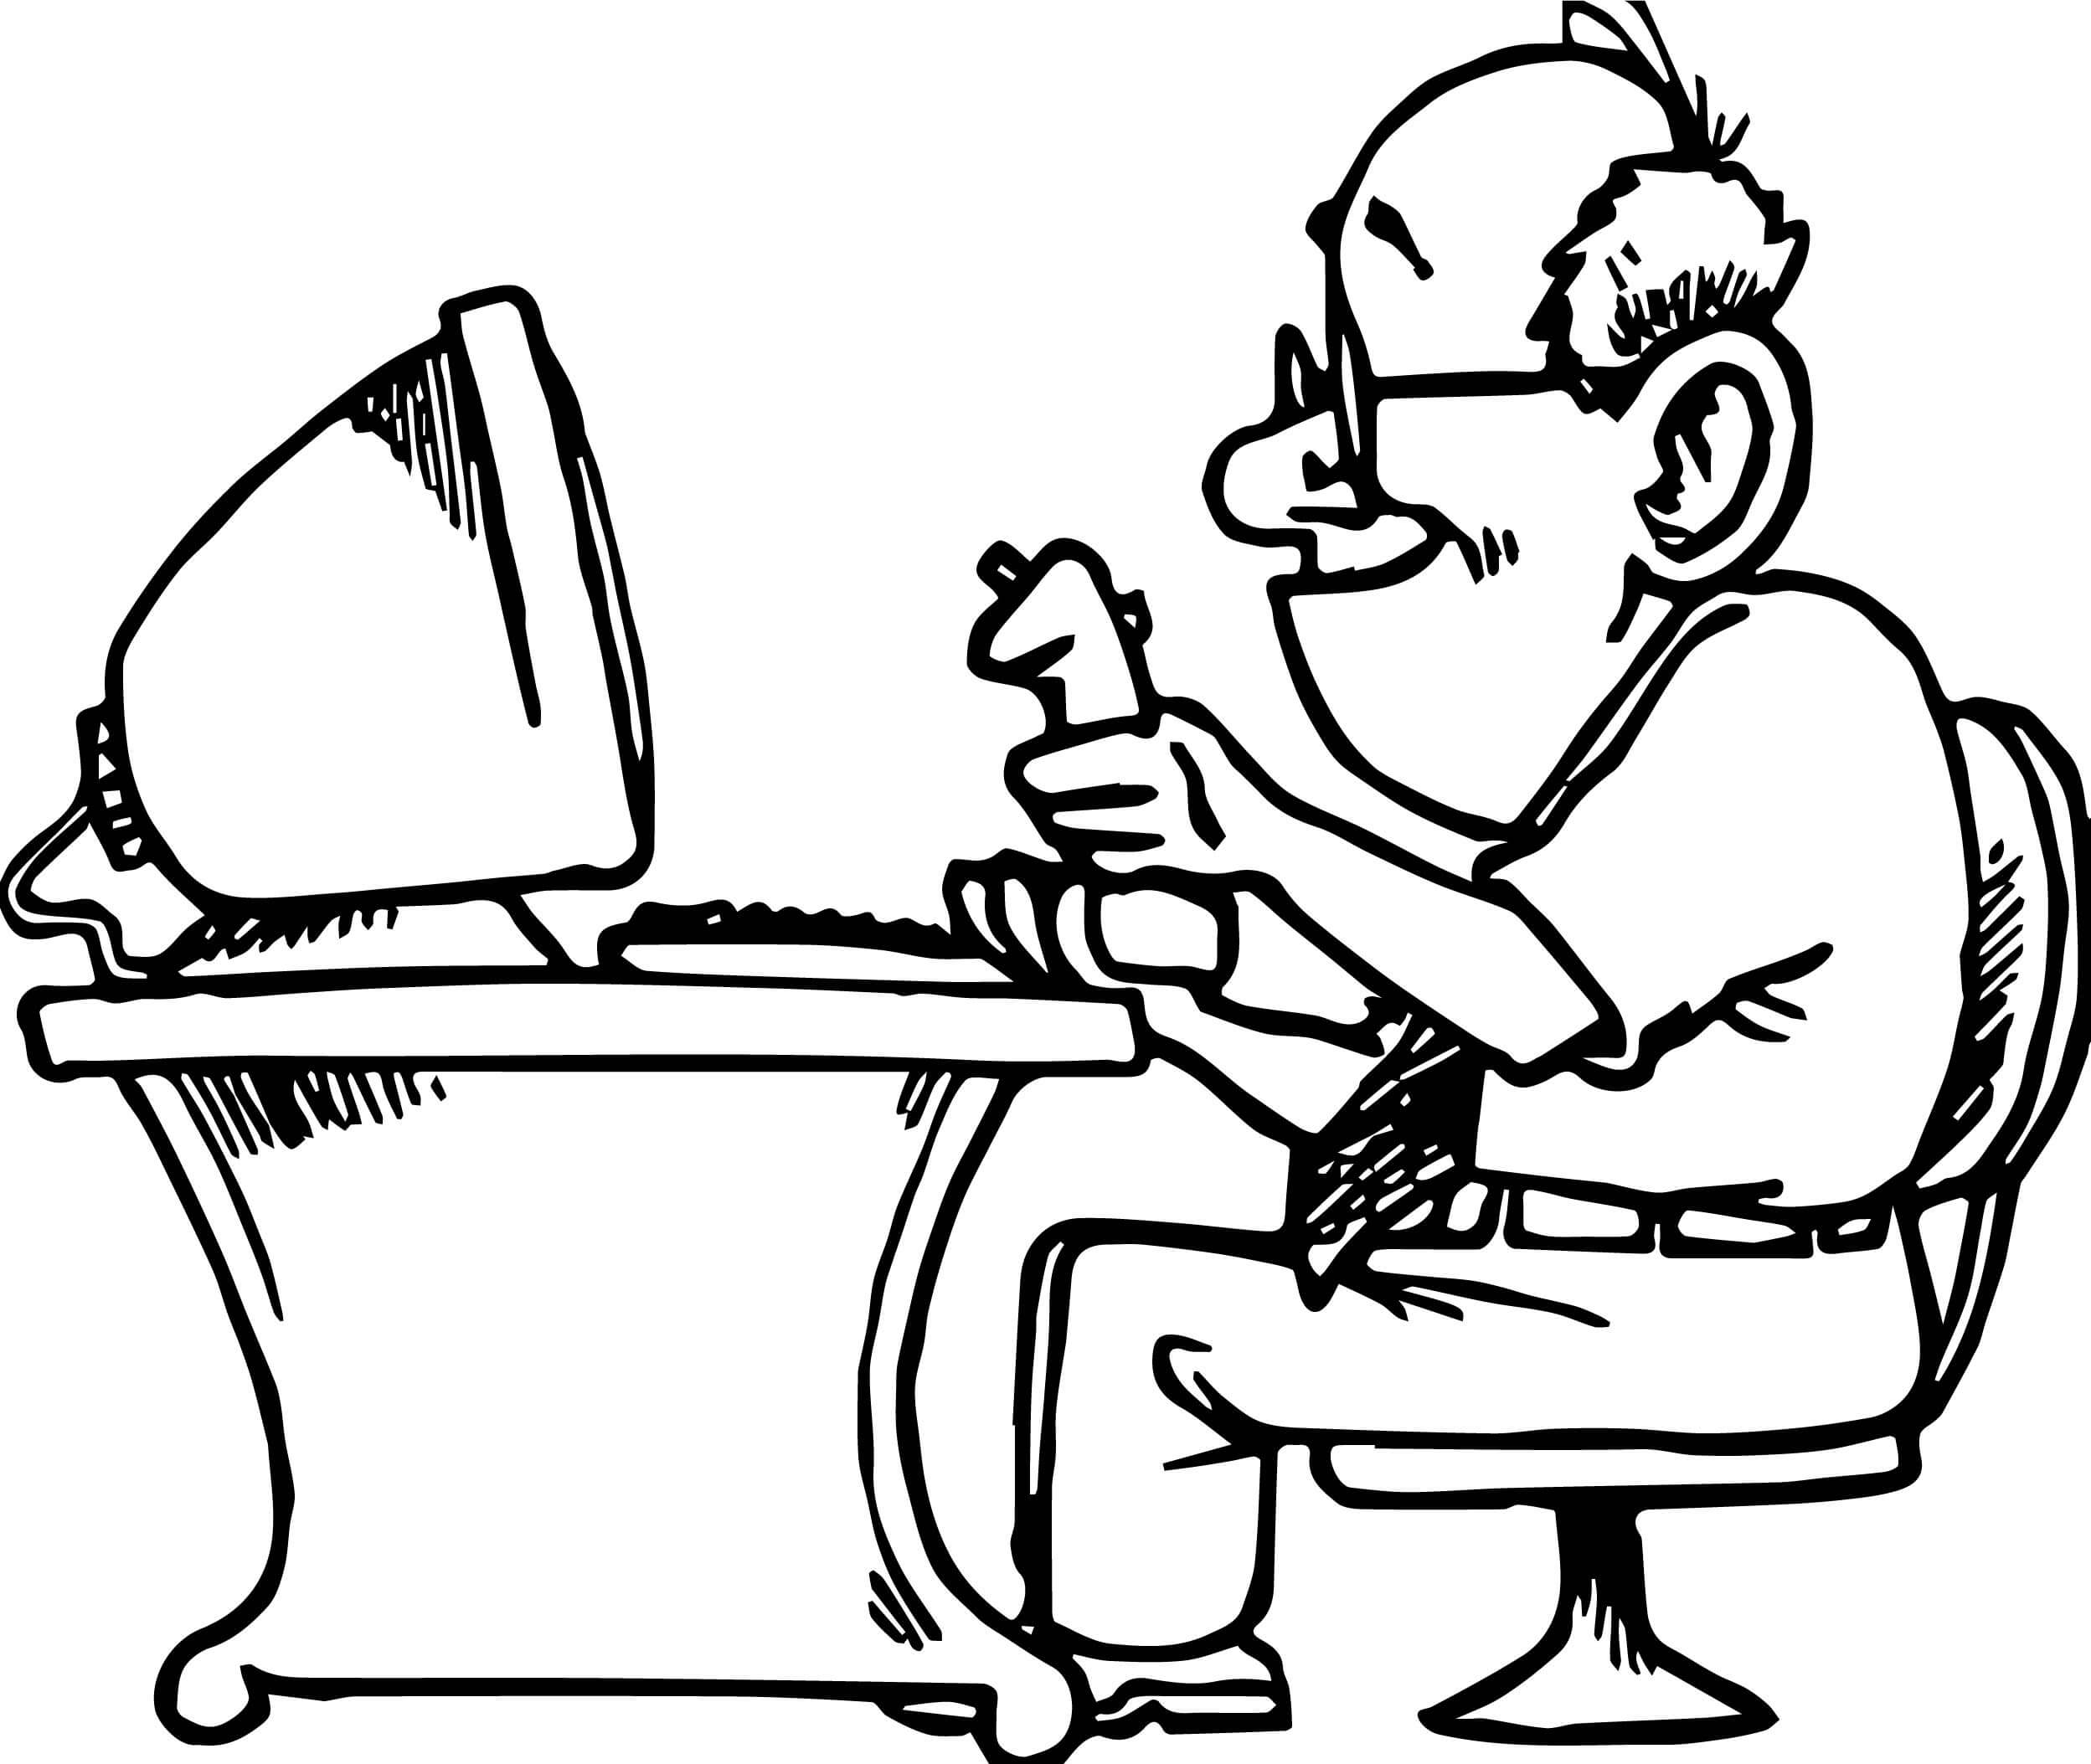 Man Playing Computer Game with Joystick Coloring Page